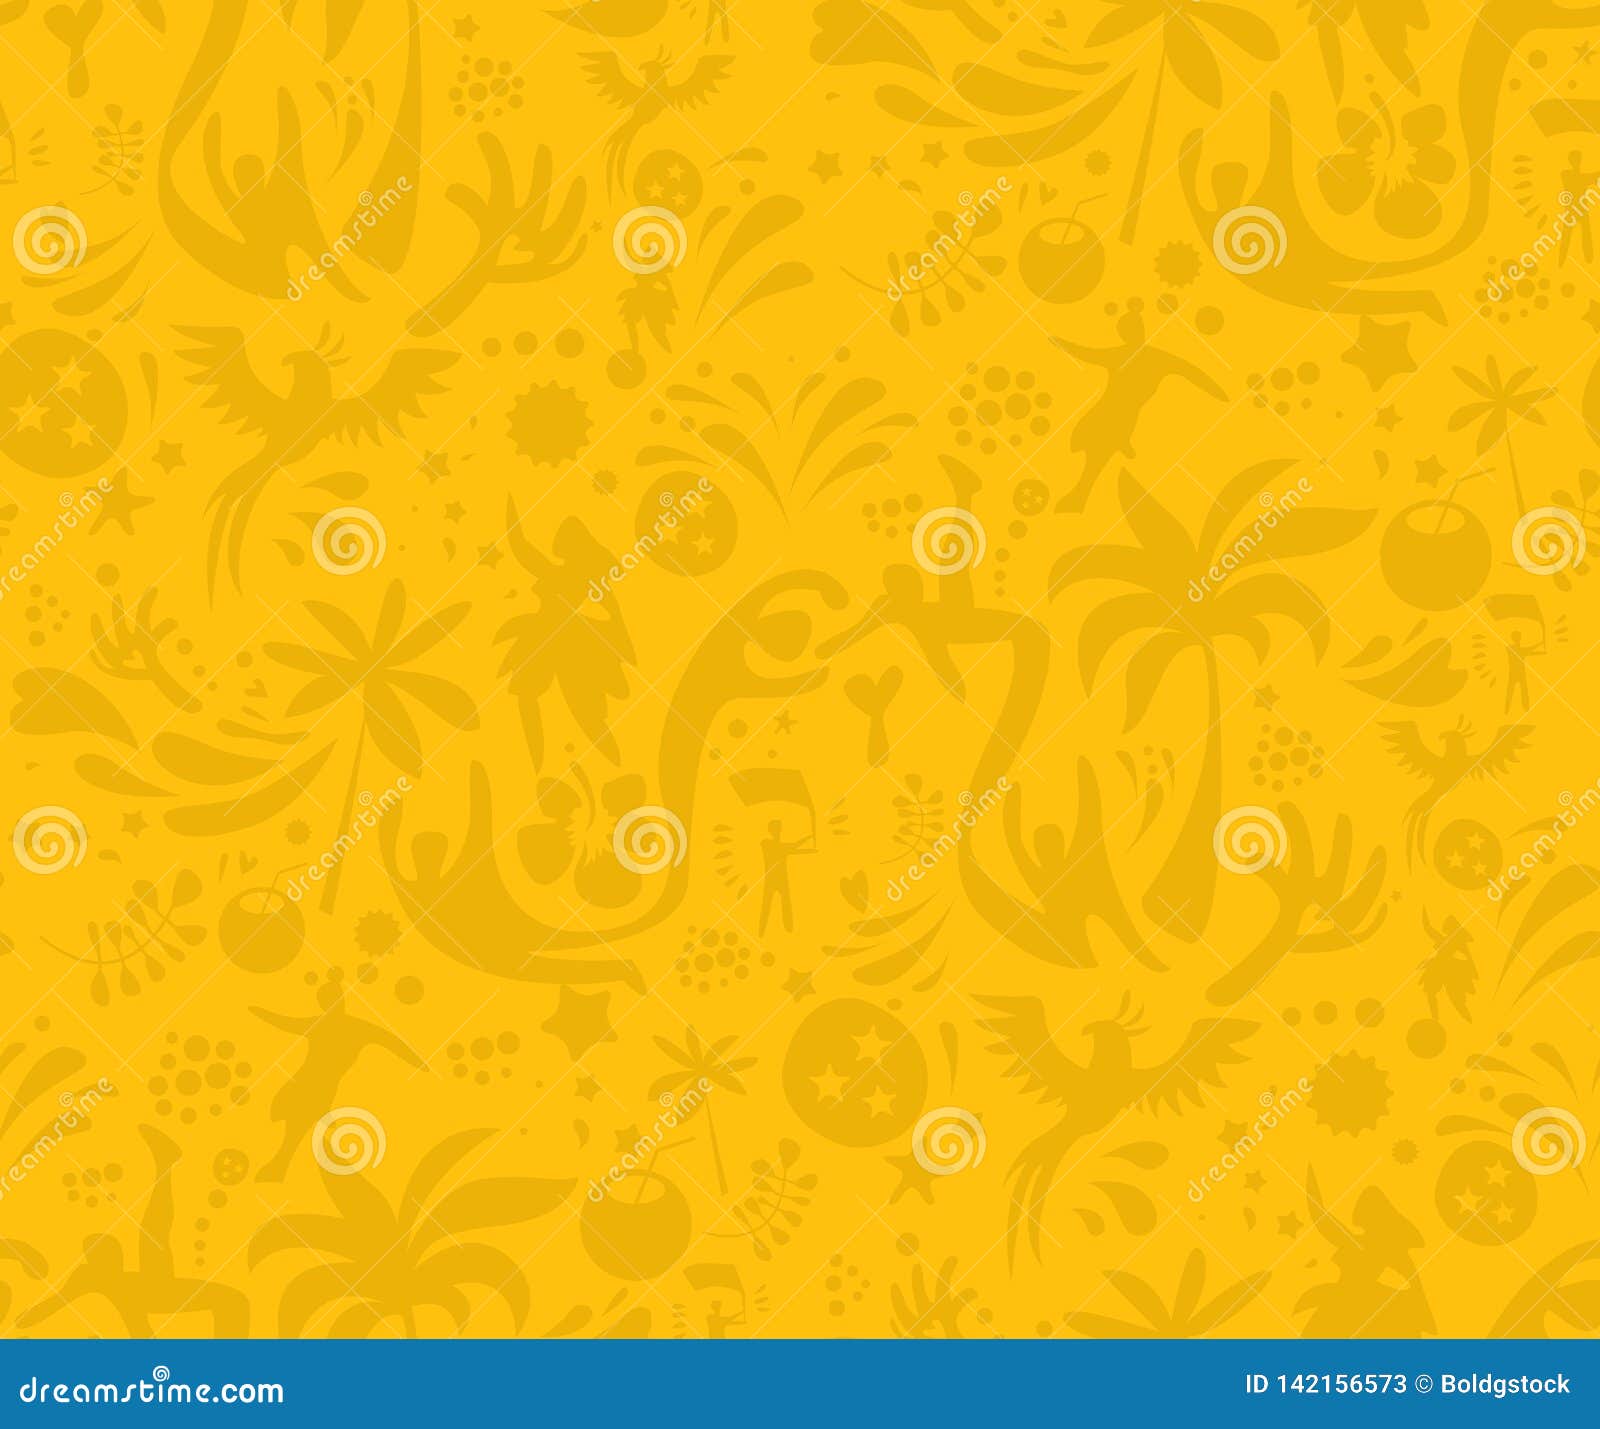 seamless sports yellow pattern, abstract football  background. seamless pattern included in swatch